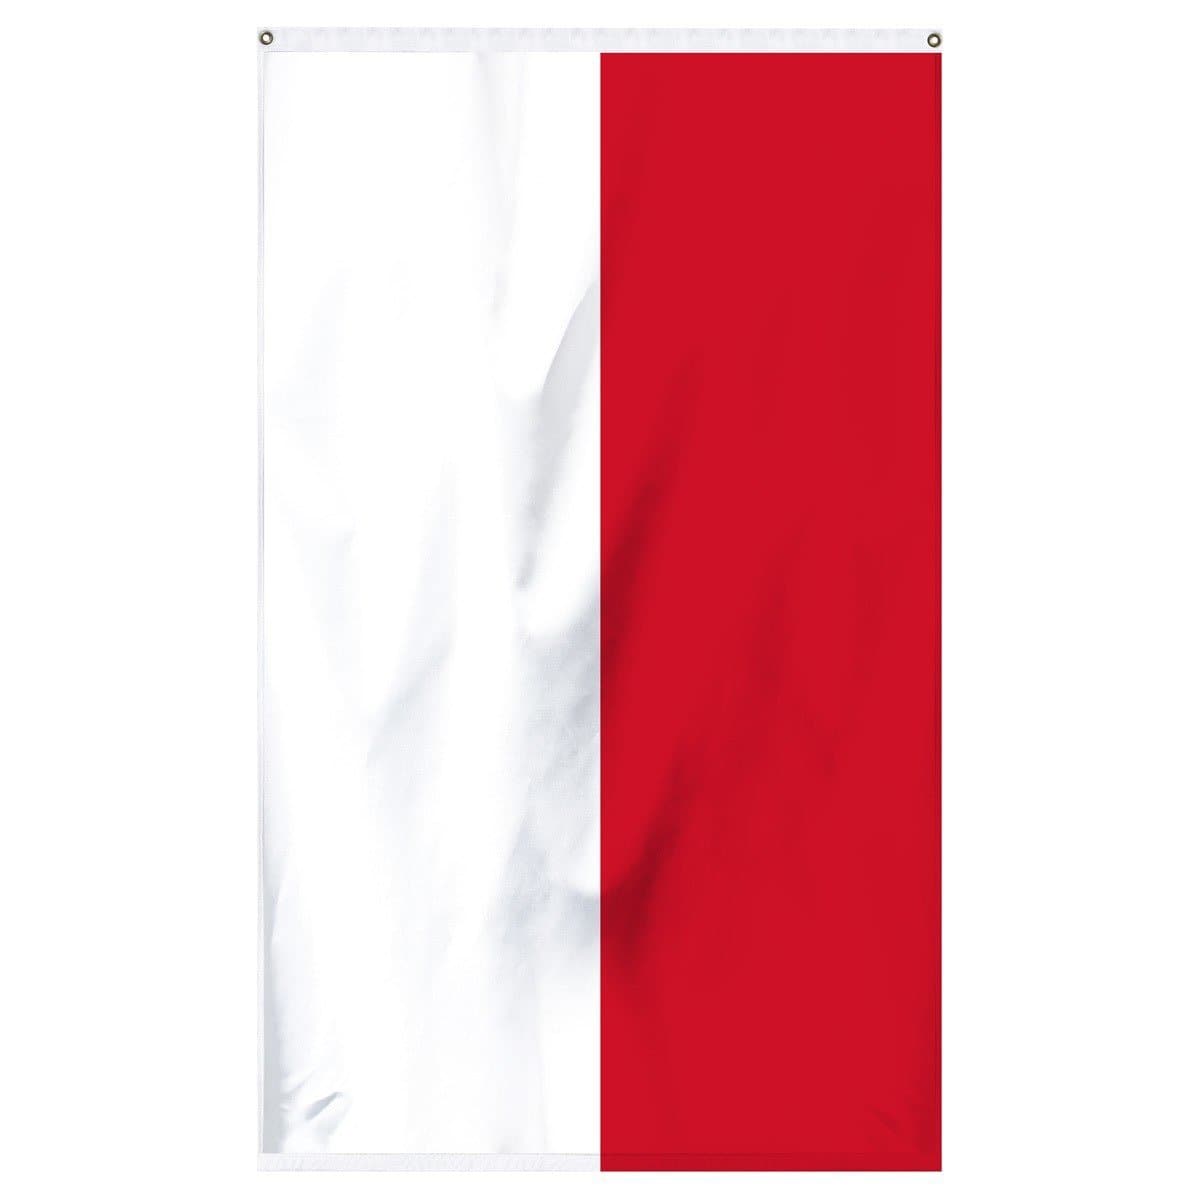 Monaco national flag for sale online from Atlantic Flagpole.